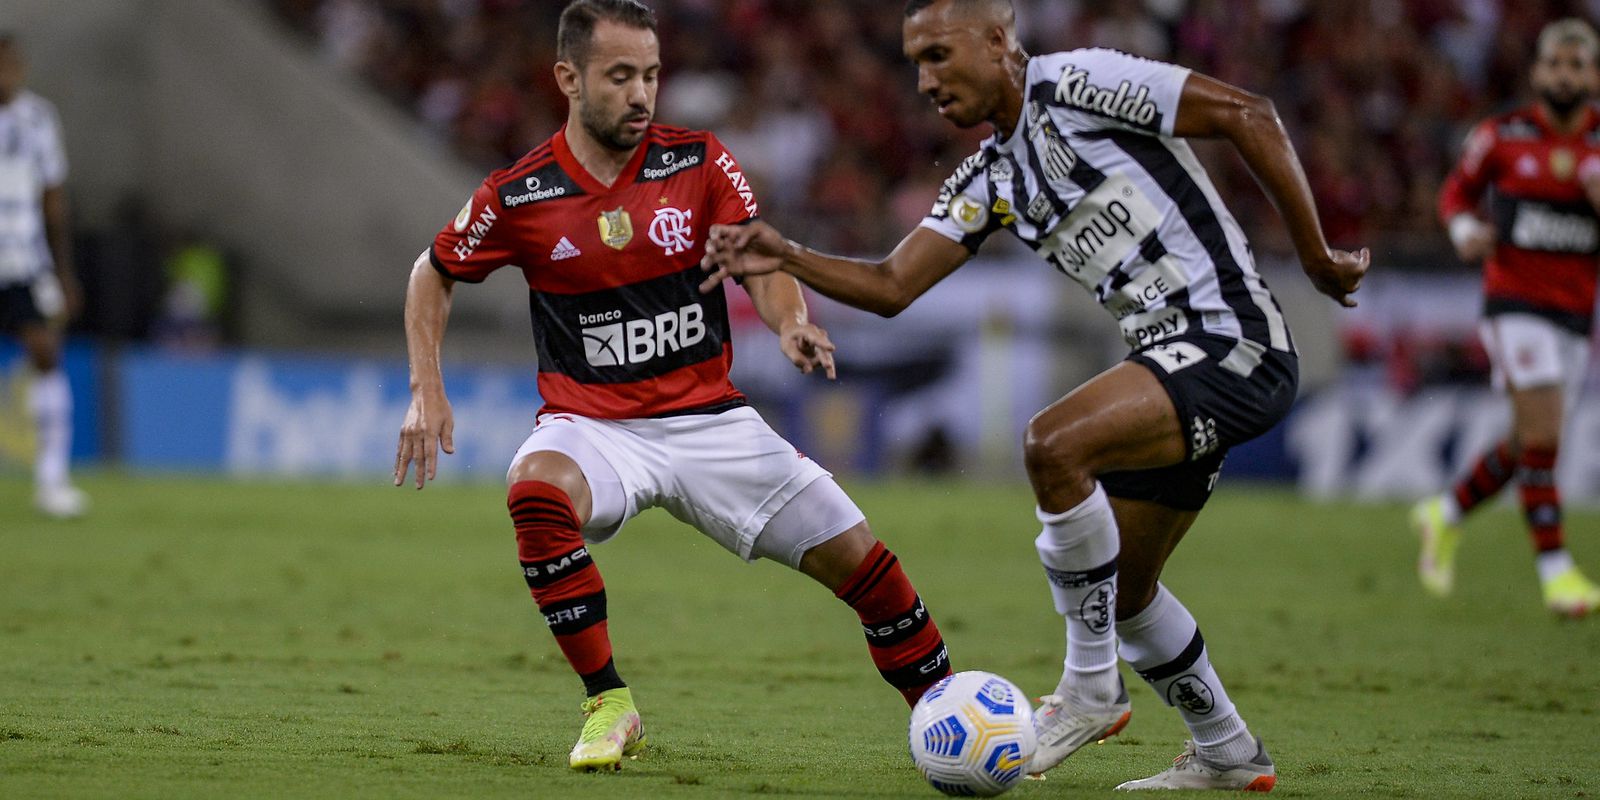 Separated by a point, Santos and Flamengo duel for the Brazilian